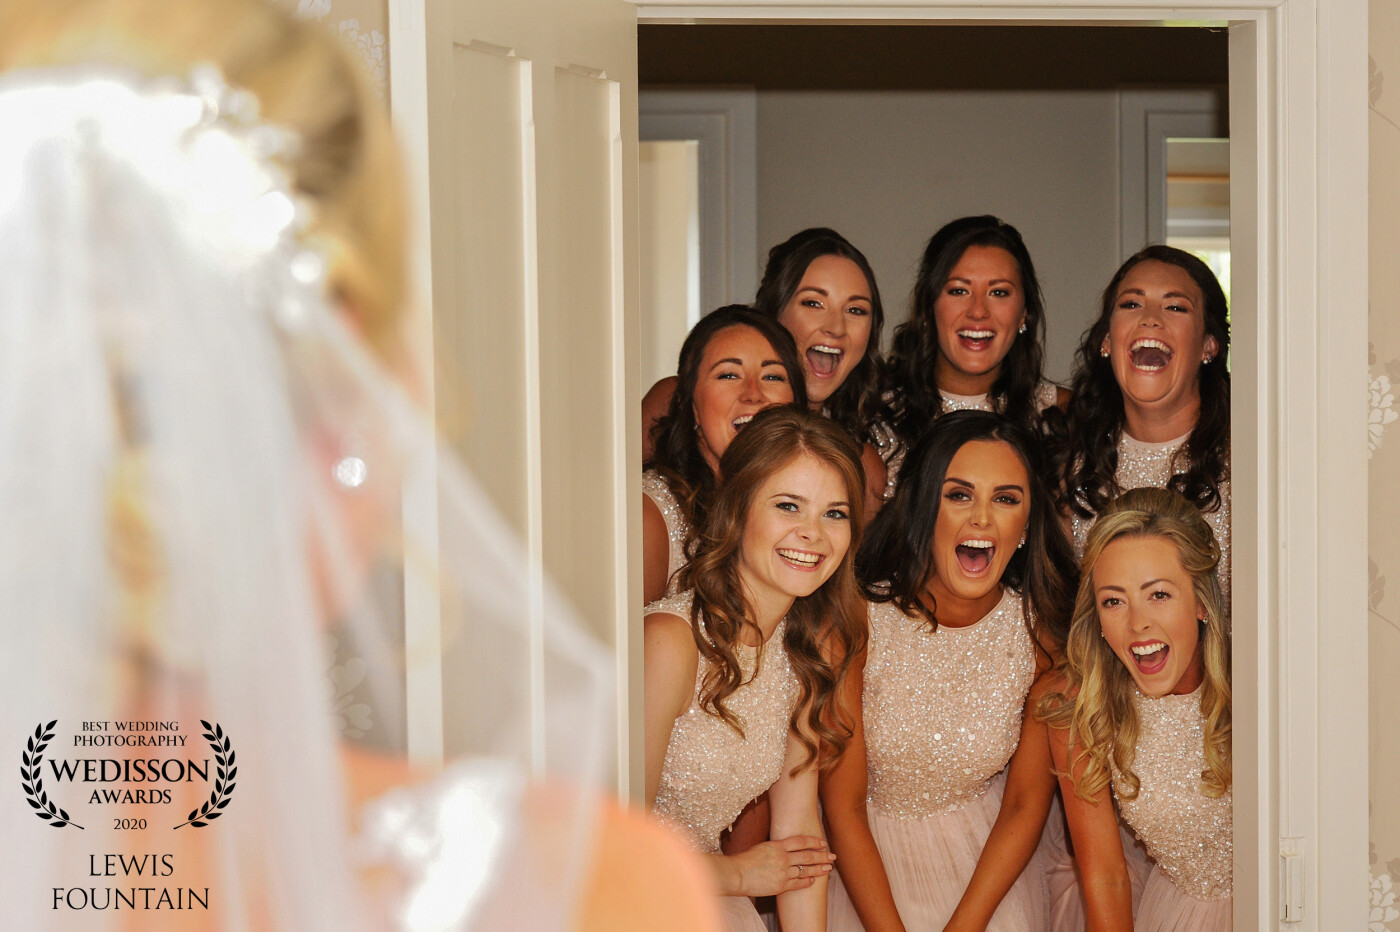 A fun shot with our bride and her bridesmaids seeing her in the dress for the first time. This shot always gets a great reaction!